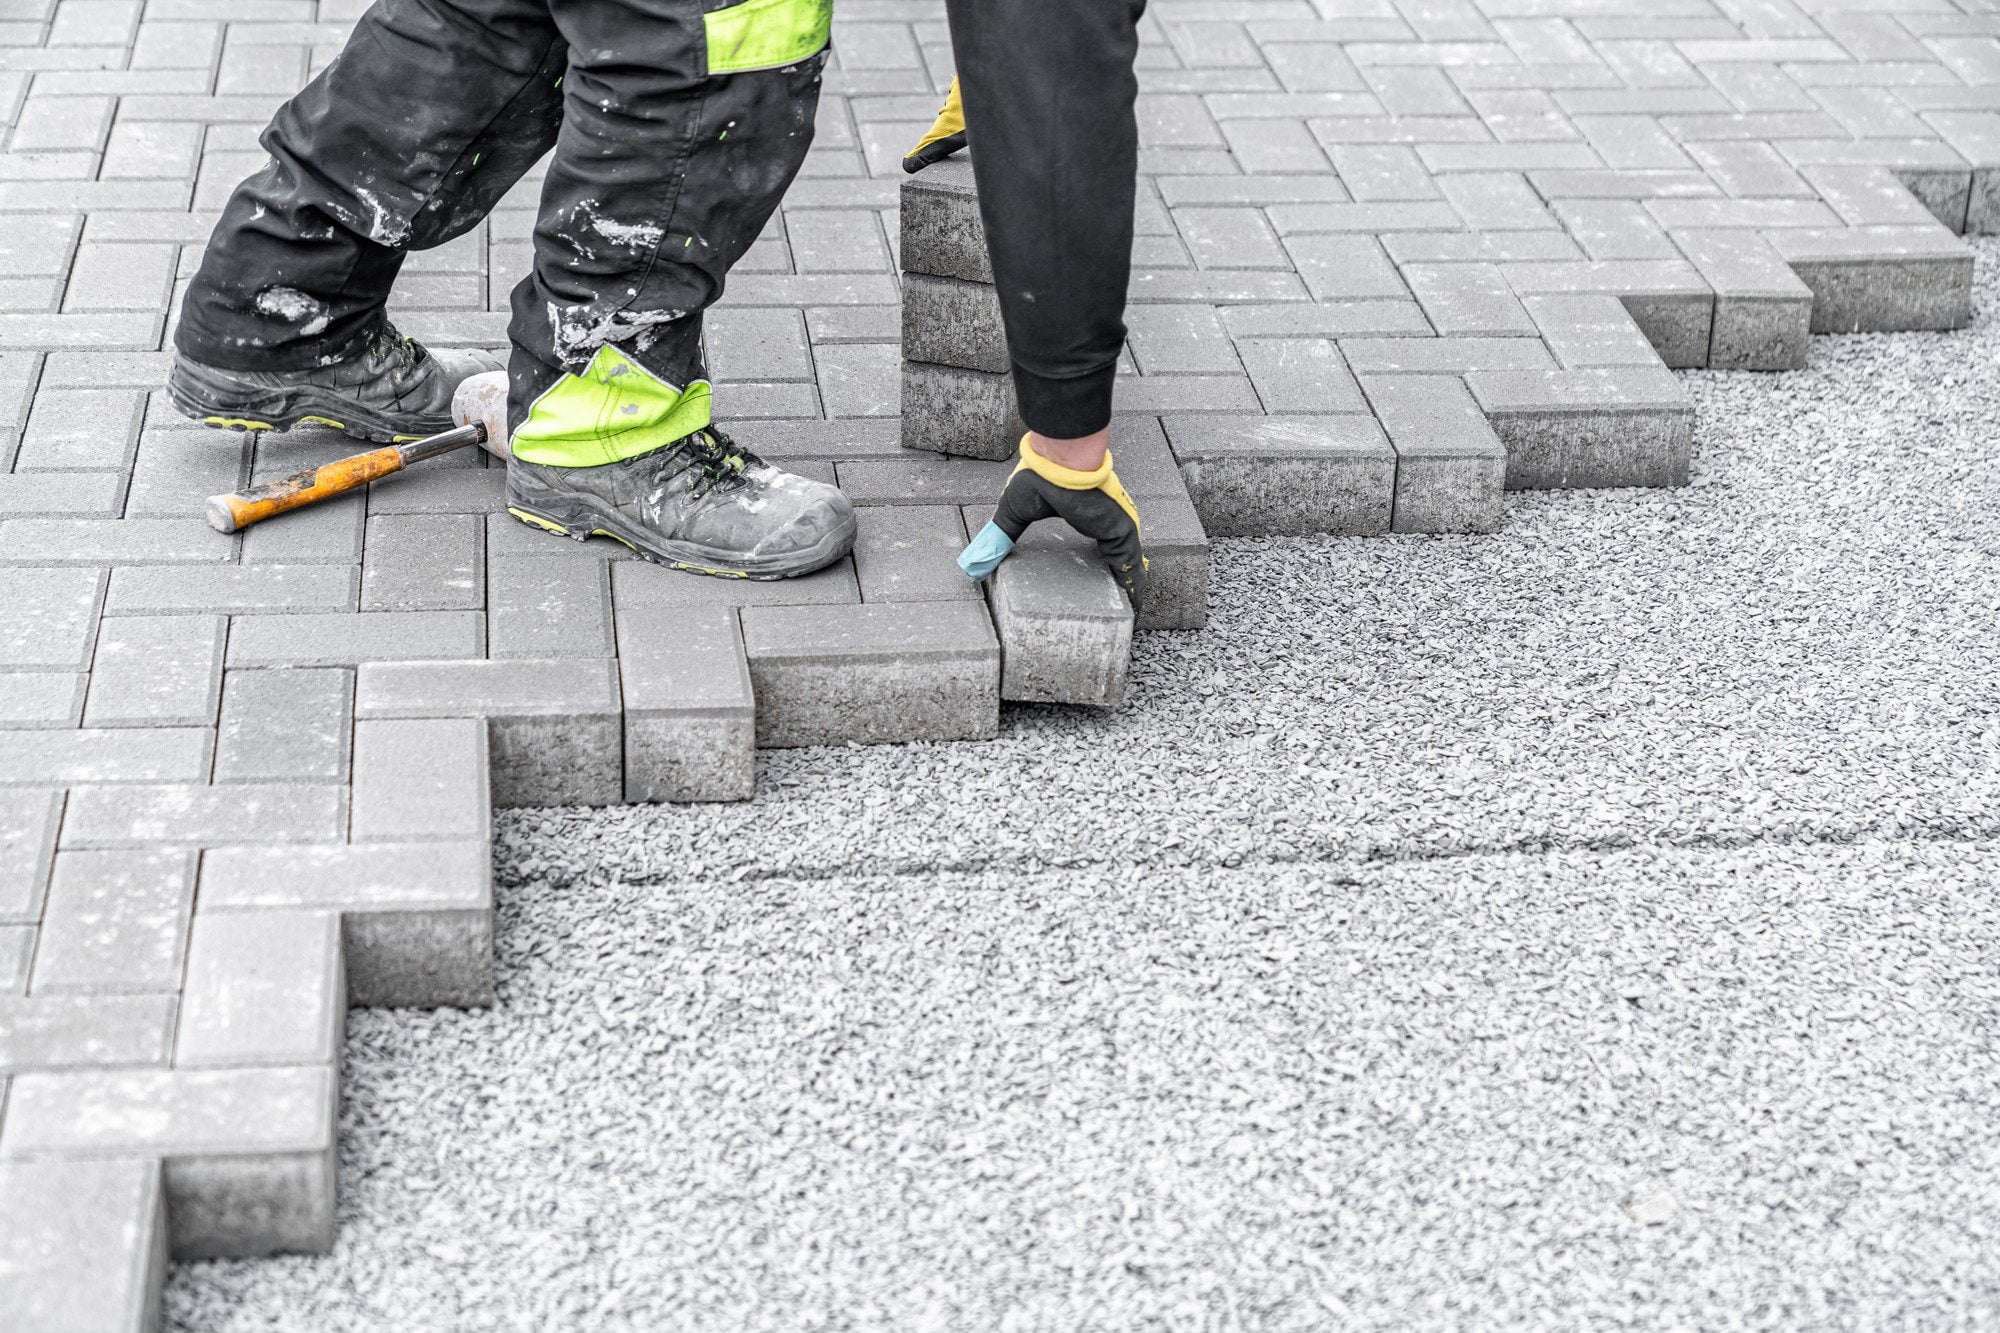 The image shows a person laying paving stones on a prepared base of crushed stone or gravel. The individual, wearing work pants, safety boots, and a high-visibility stripe on the leg, is in the process of setting a gray paving block into place. There's a rubber mallet resting on the ground, which is presumably used to tap the paving stones into a level position. The ground is partially covered with finished paving, while the other part awaits the placement of more blocks. This is a typical scene of outdoor construction or landscaping work where a new pavement, driveway, or walkway is being installed.